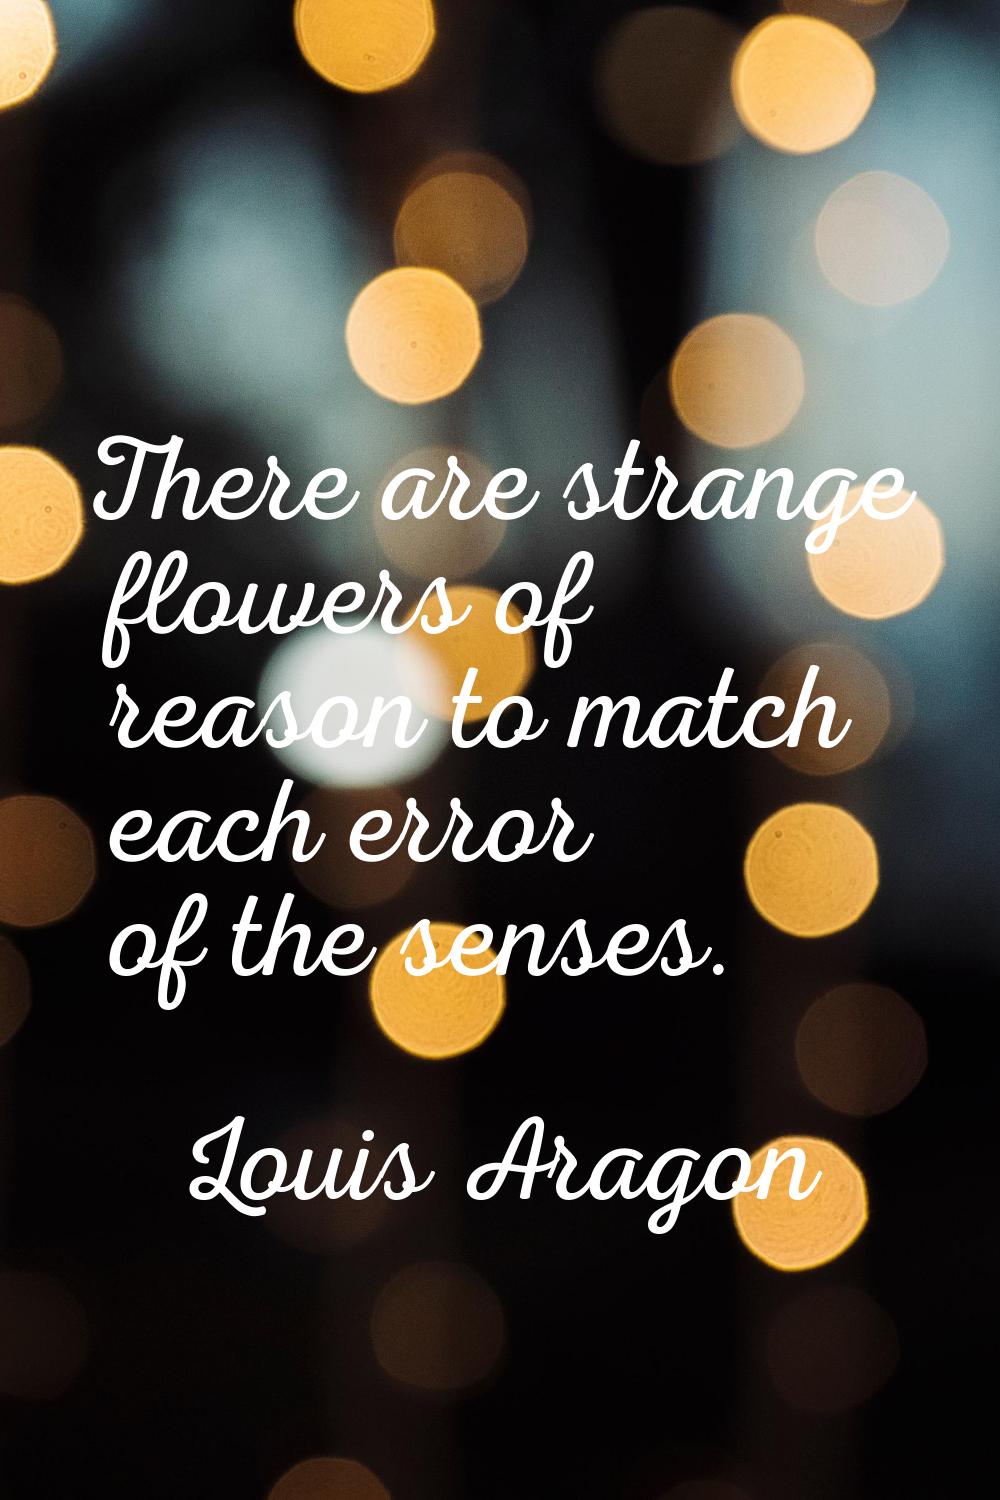 There are strange flowers of reason to match each error of the senses.